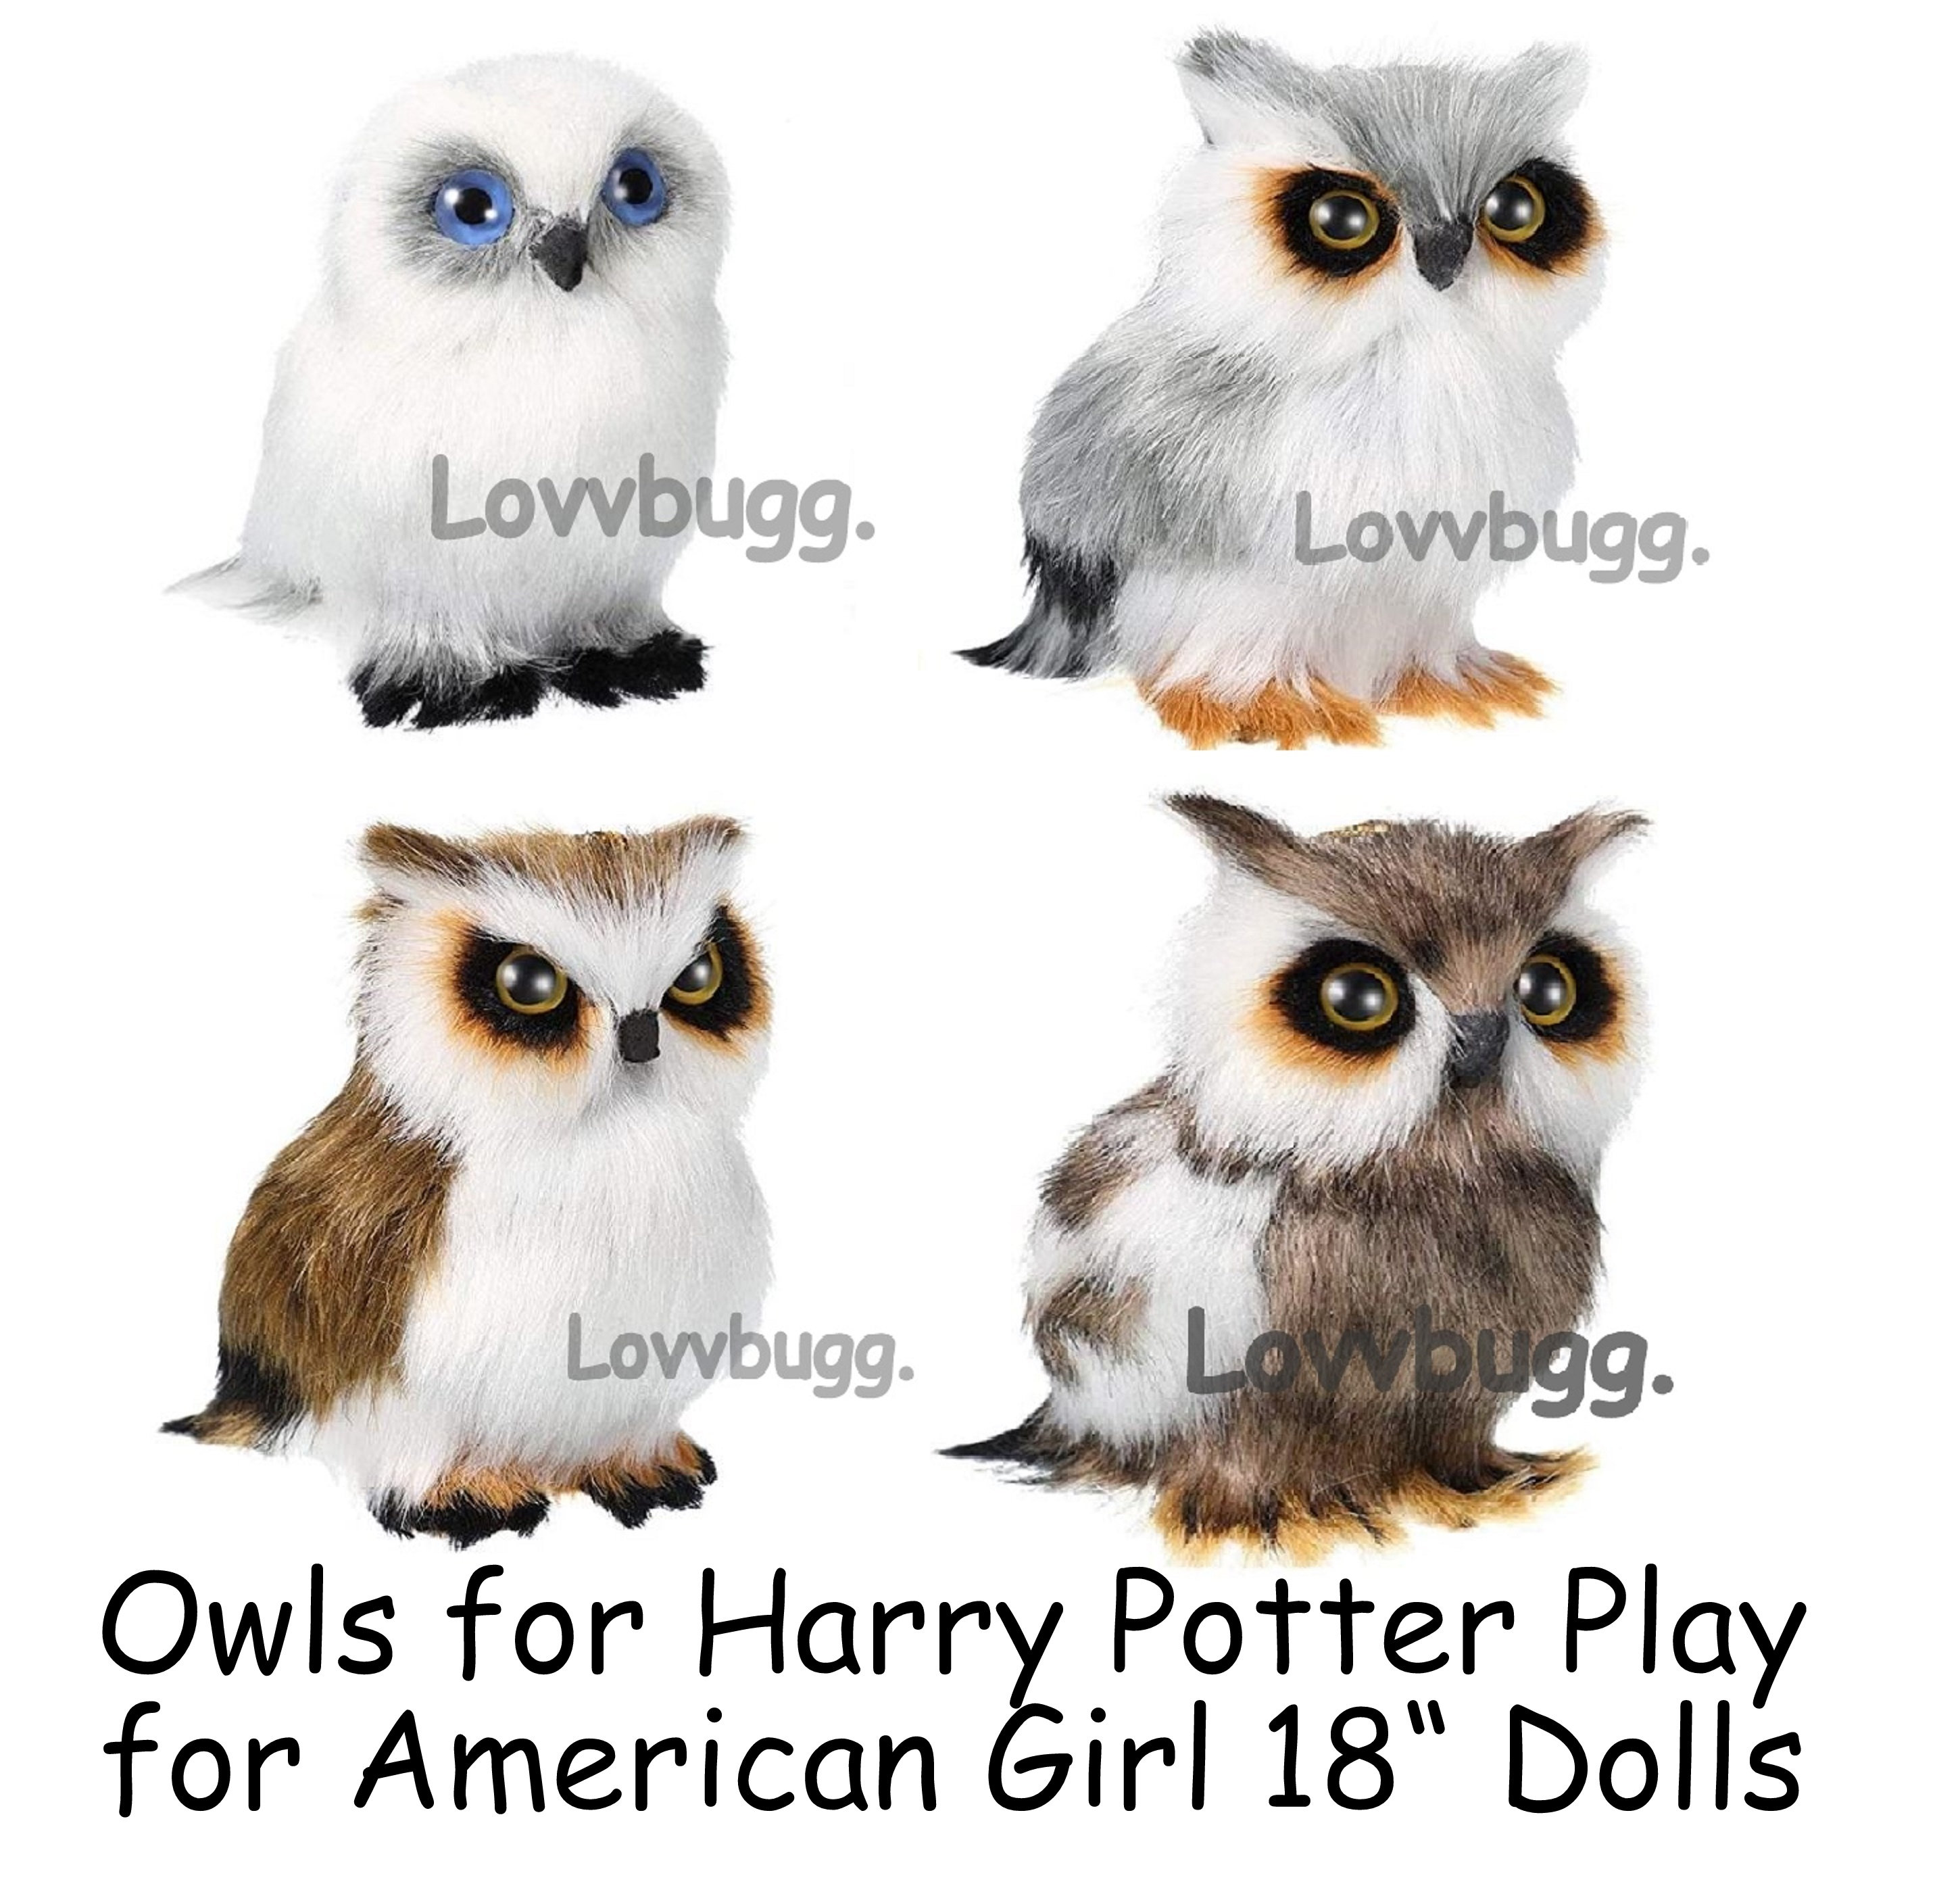 No Owl Post for Muggles - Harry Potter Stamps - Geek News Central